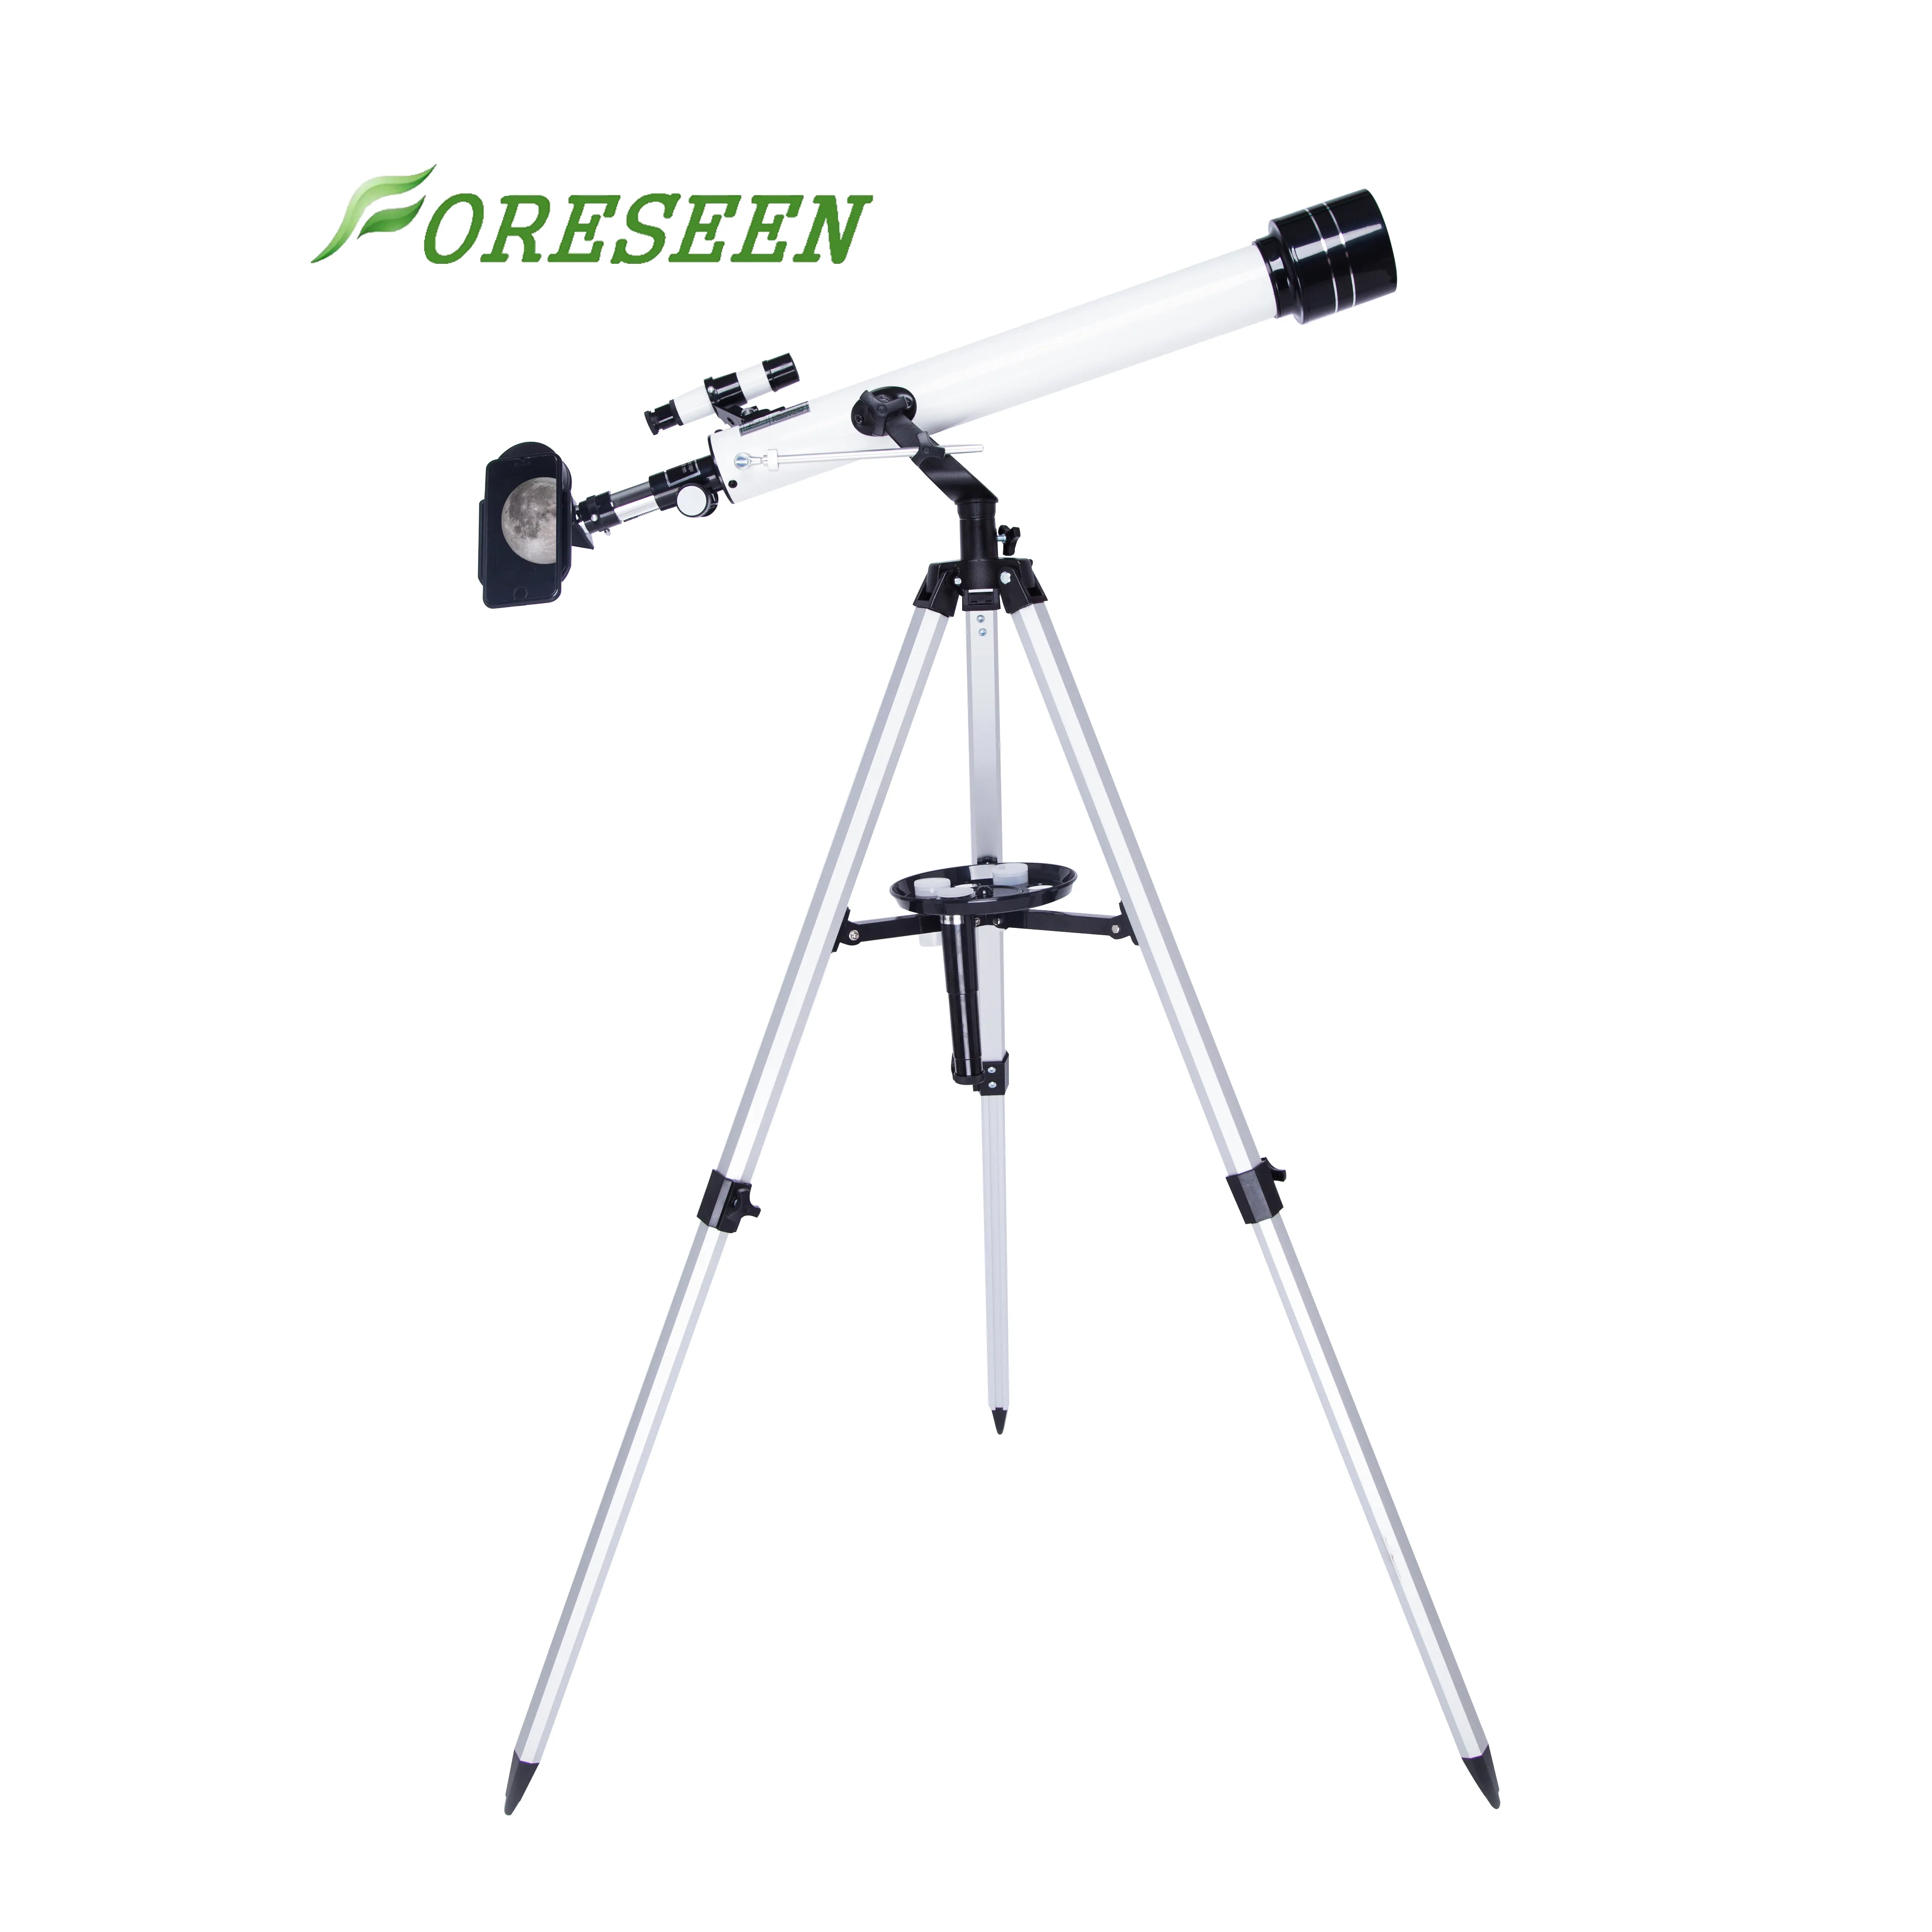 FORESEEN professional astronomical telescope night vision deep space star view moon Monocular Telescope